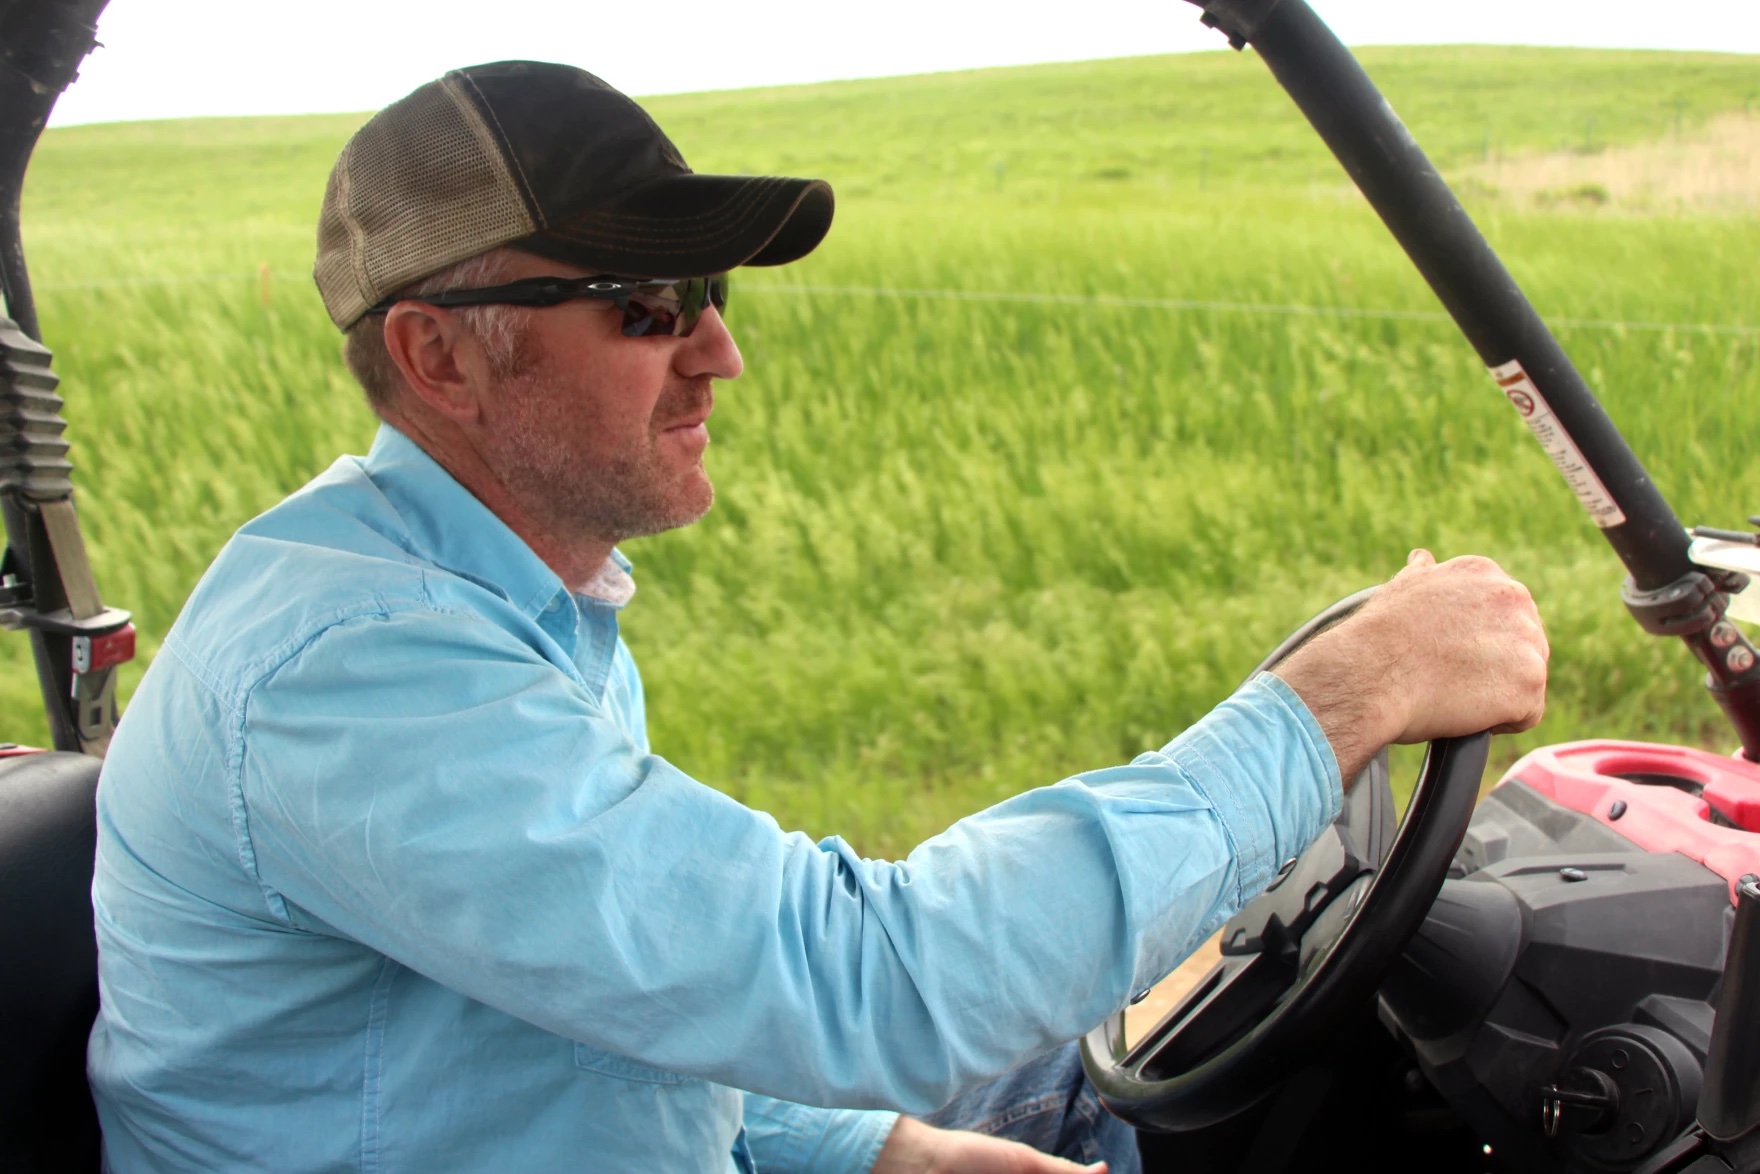 A man wearing a hat and sunglasses driving a vehicle on a prairie.